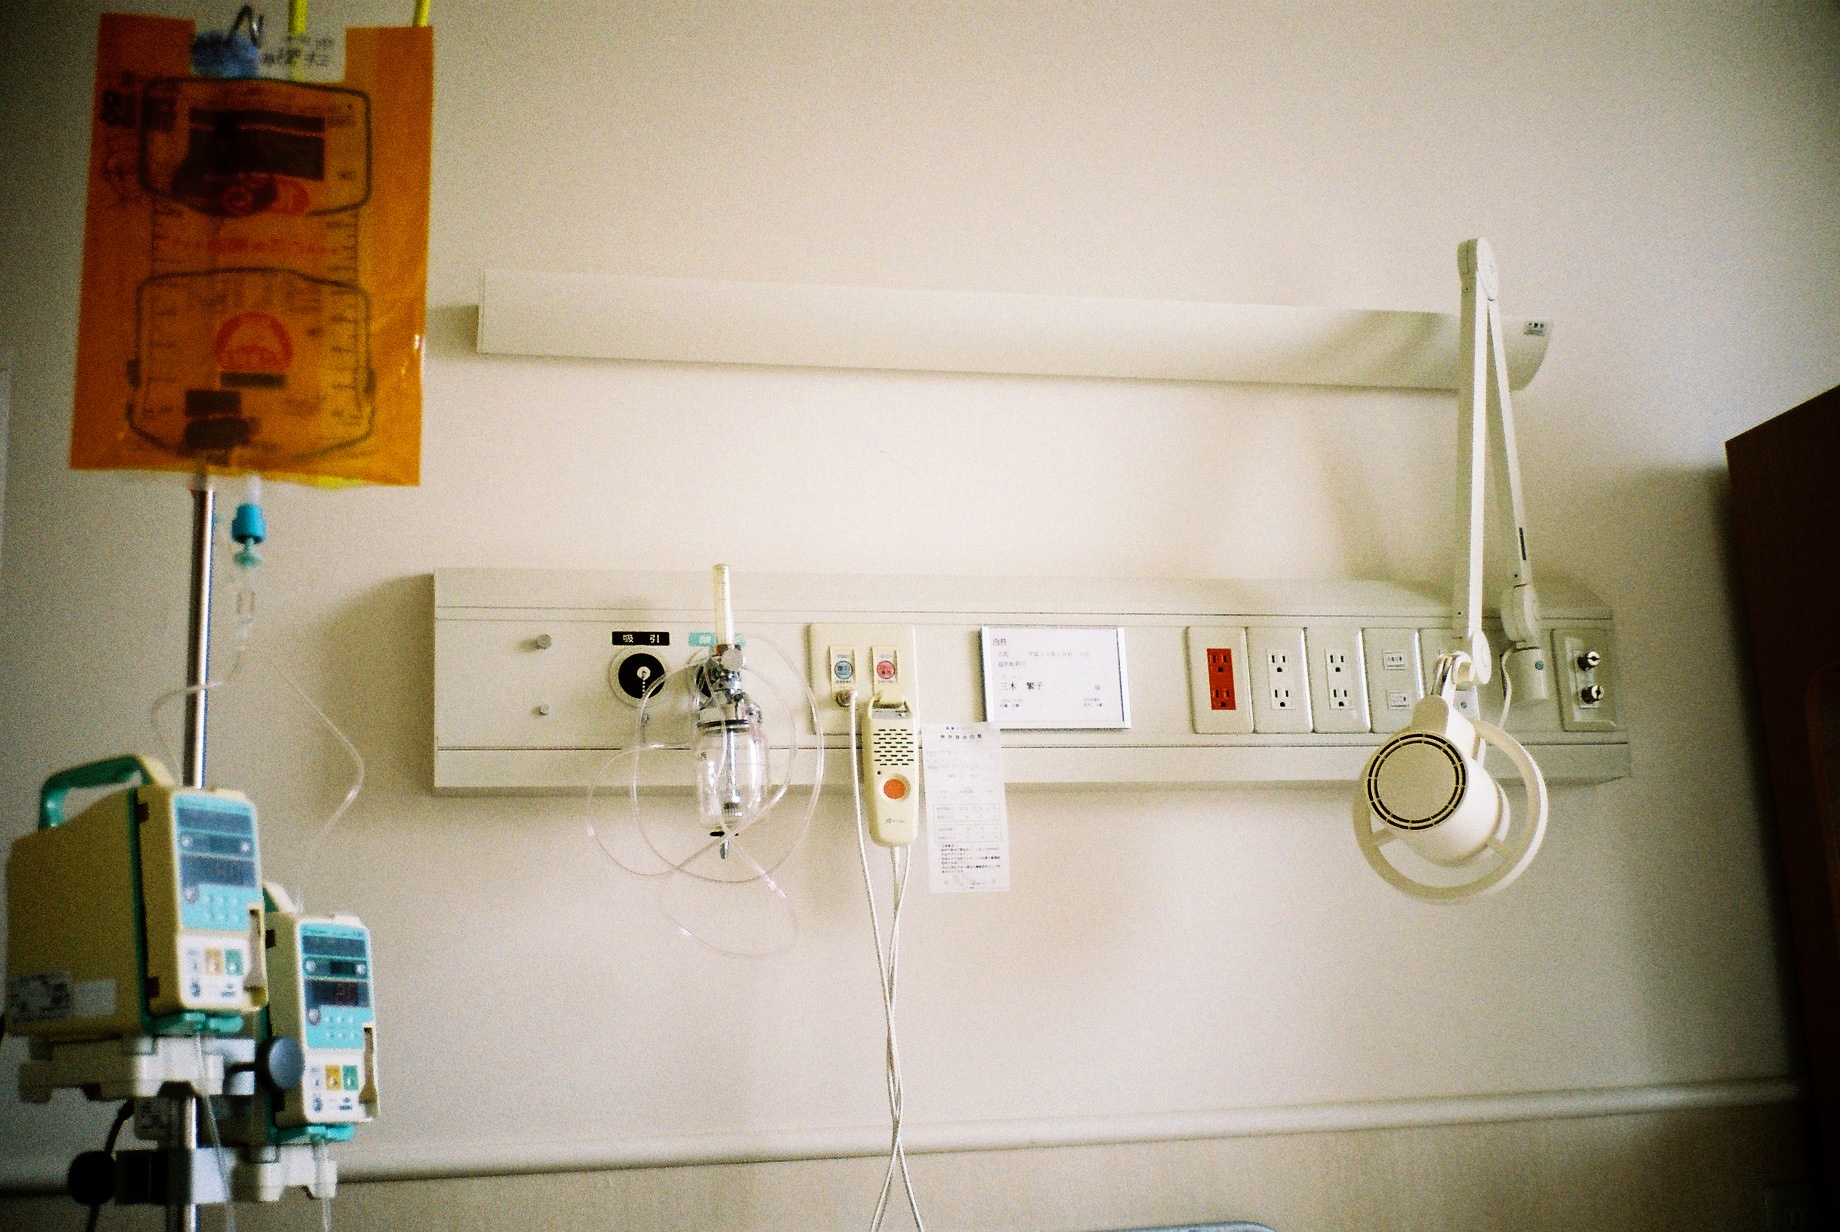 the medical equipment is hanging on the wall